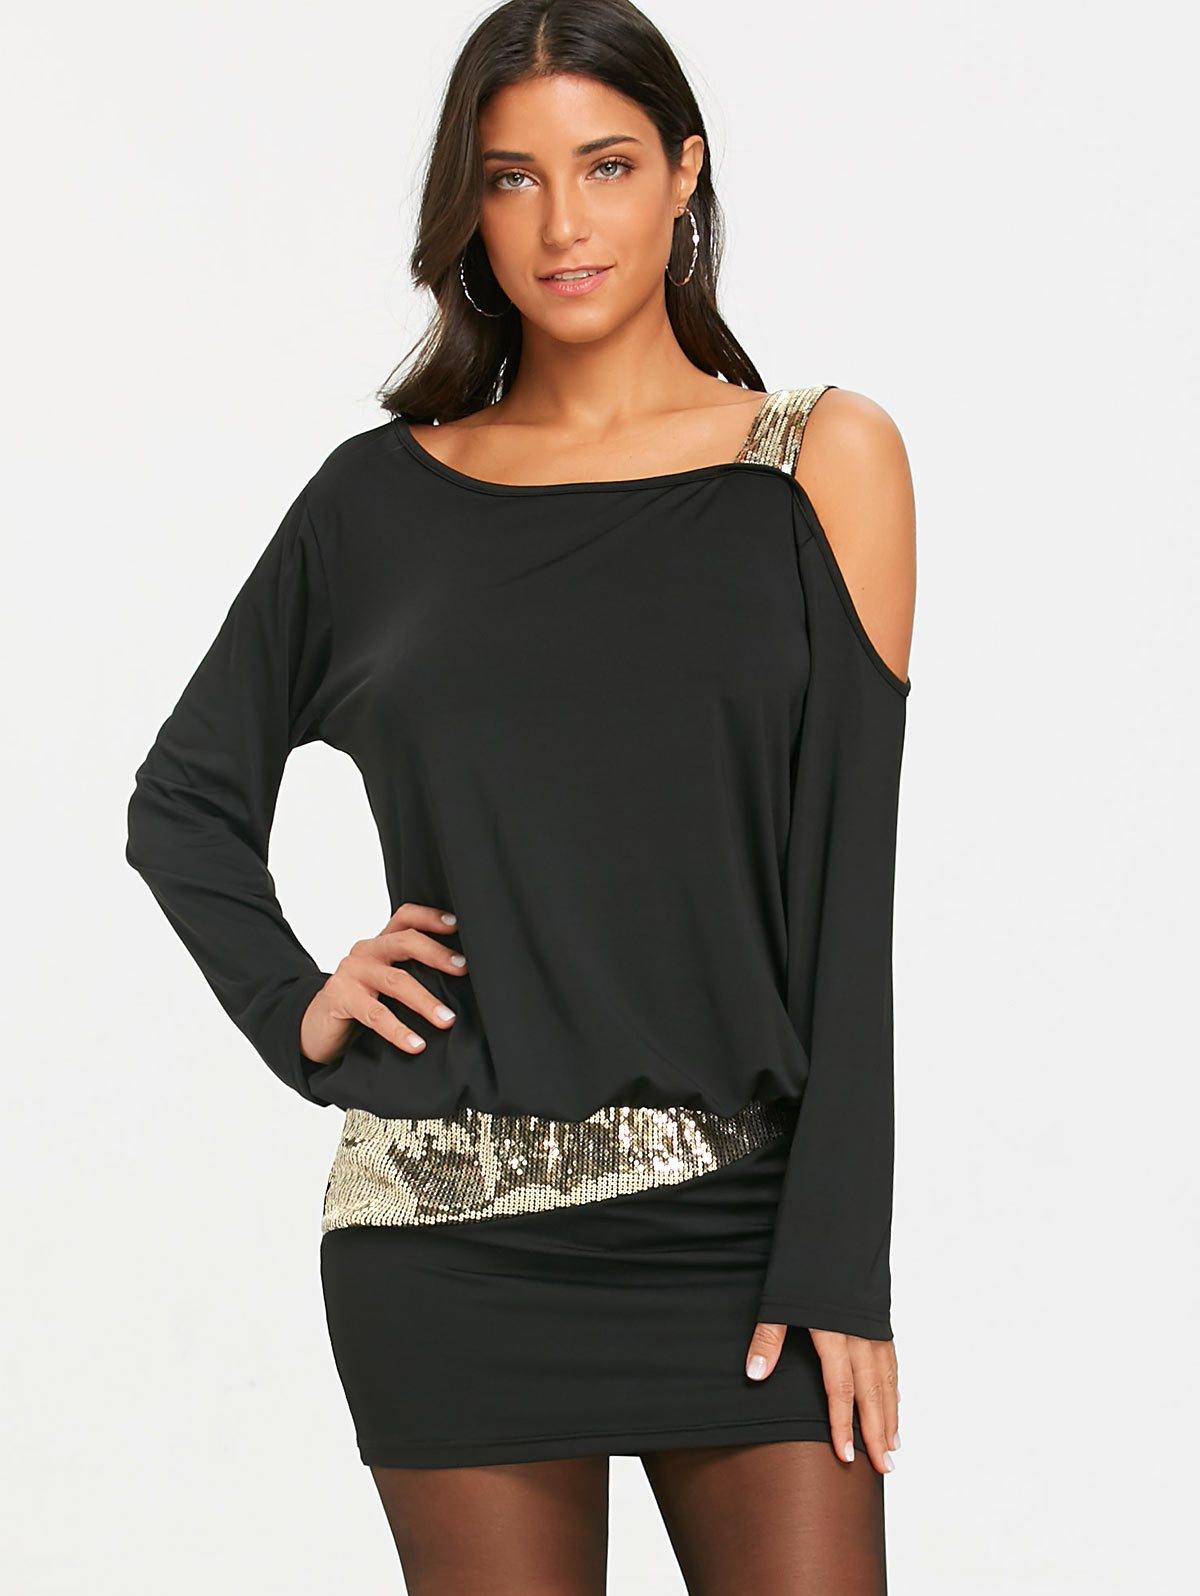 Black  Dress Long Sleeve - For you and all